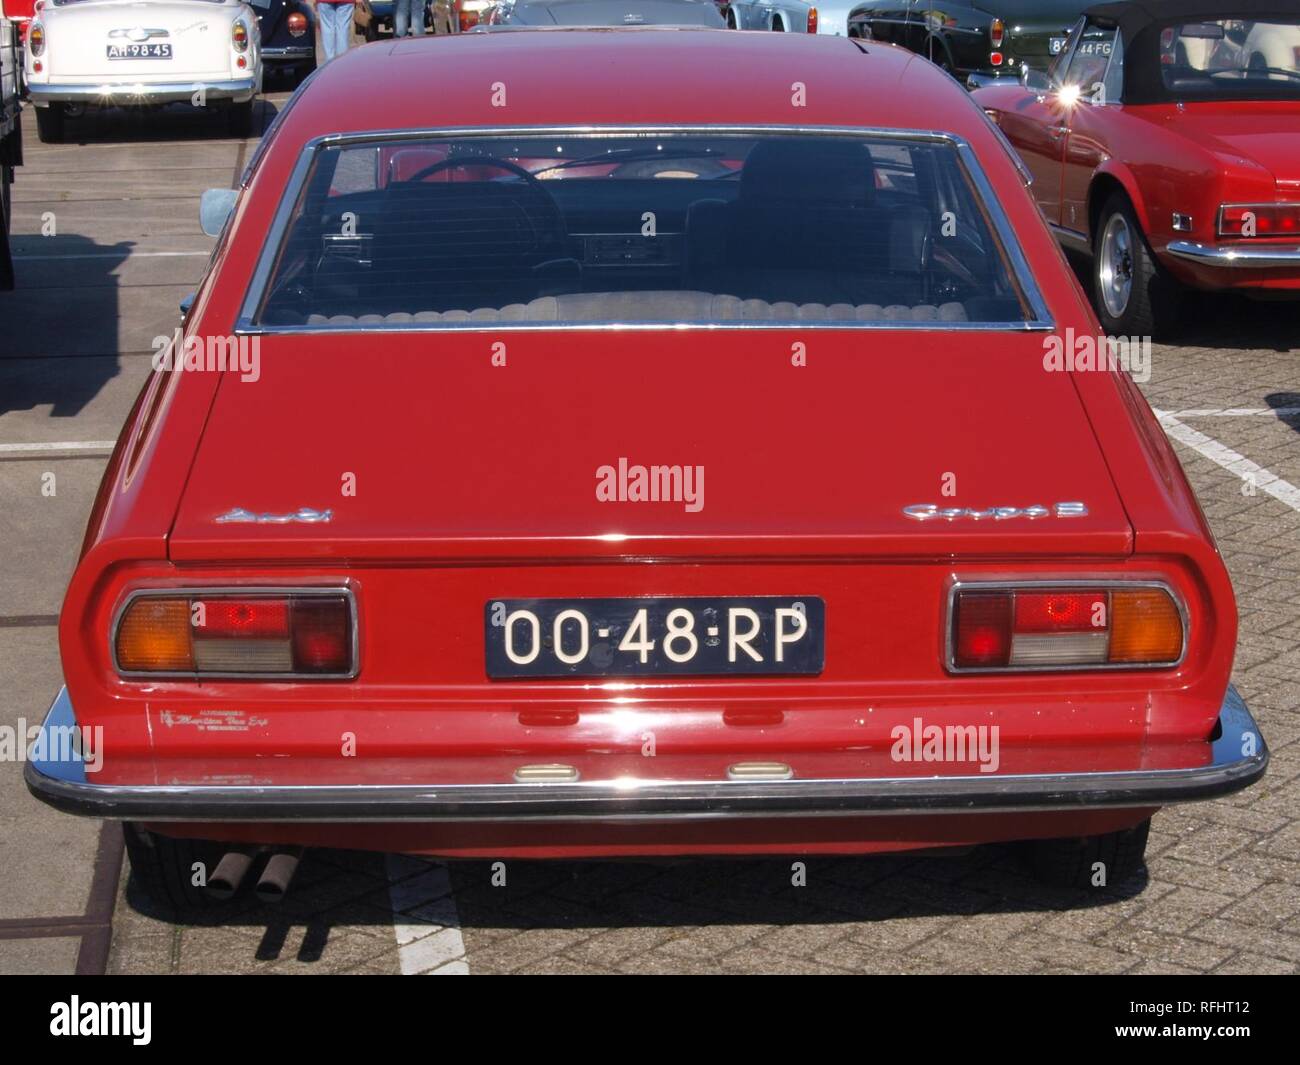 Audi 100 Coupe S, build in 1977, Dutch licence registration 00-48-RP, at IJmuiden, The Netherlands, pic1. Stock Photo